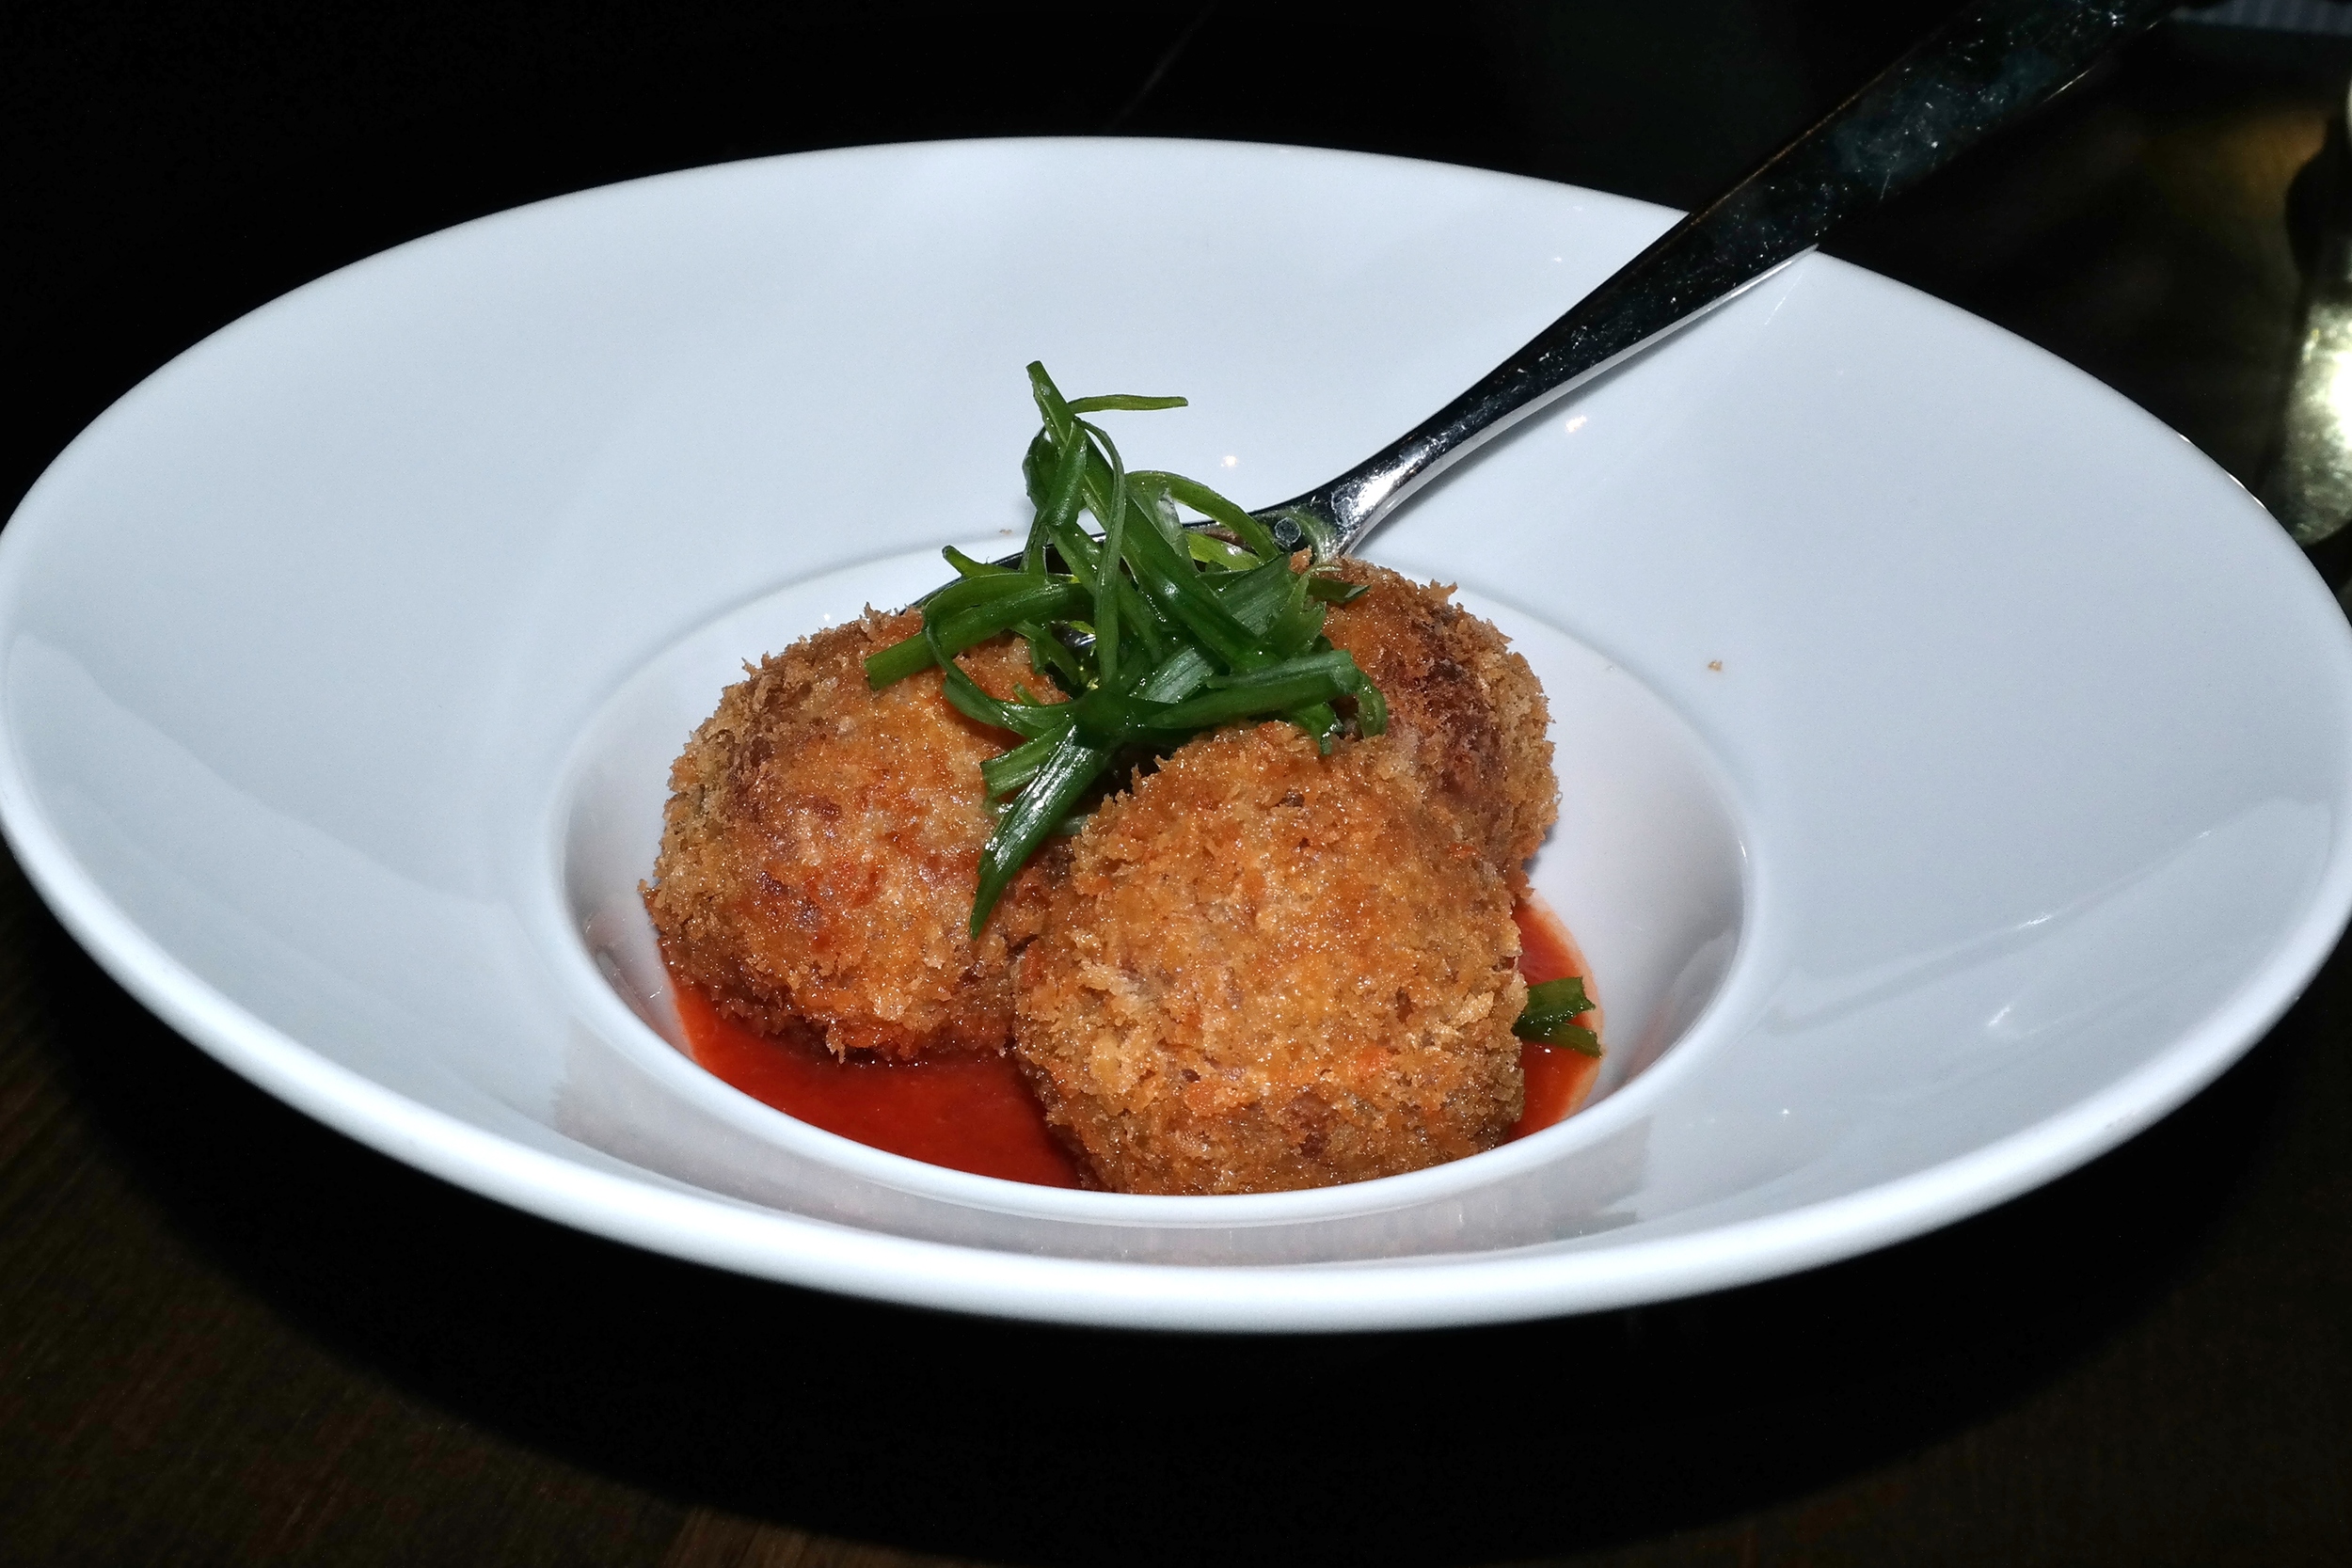 Boudin balls with tomato jam and green onion